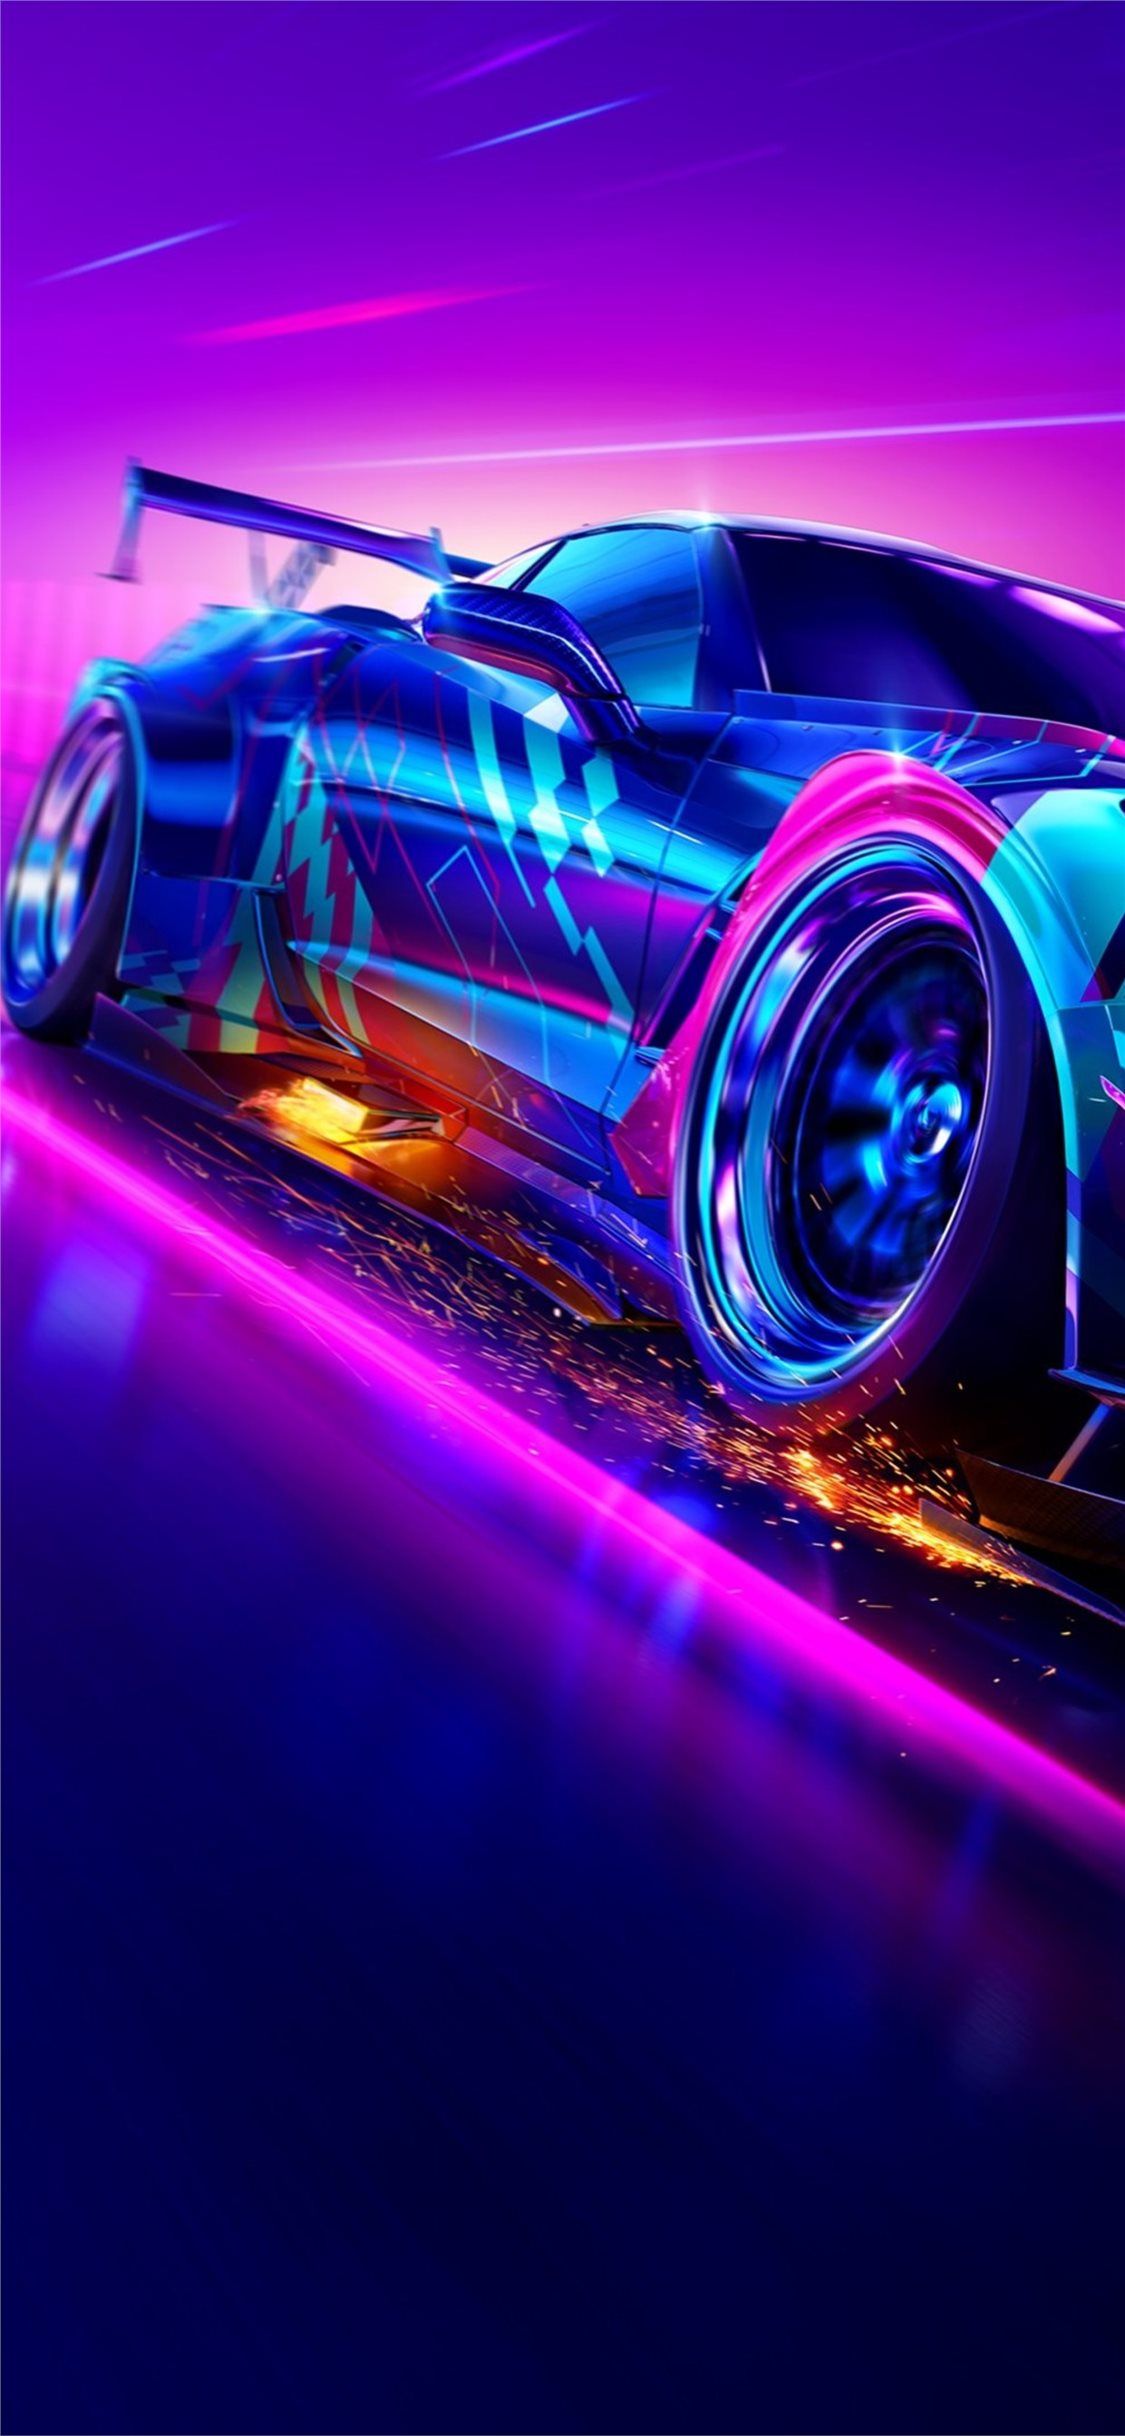 Free download the need for speed heat 2019 4k Wallpaper wallpaper